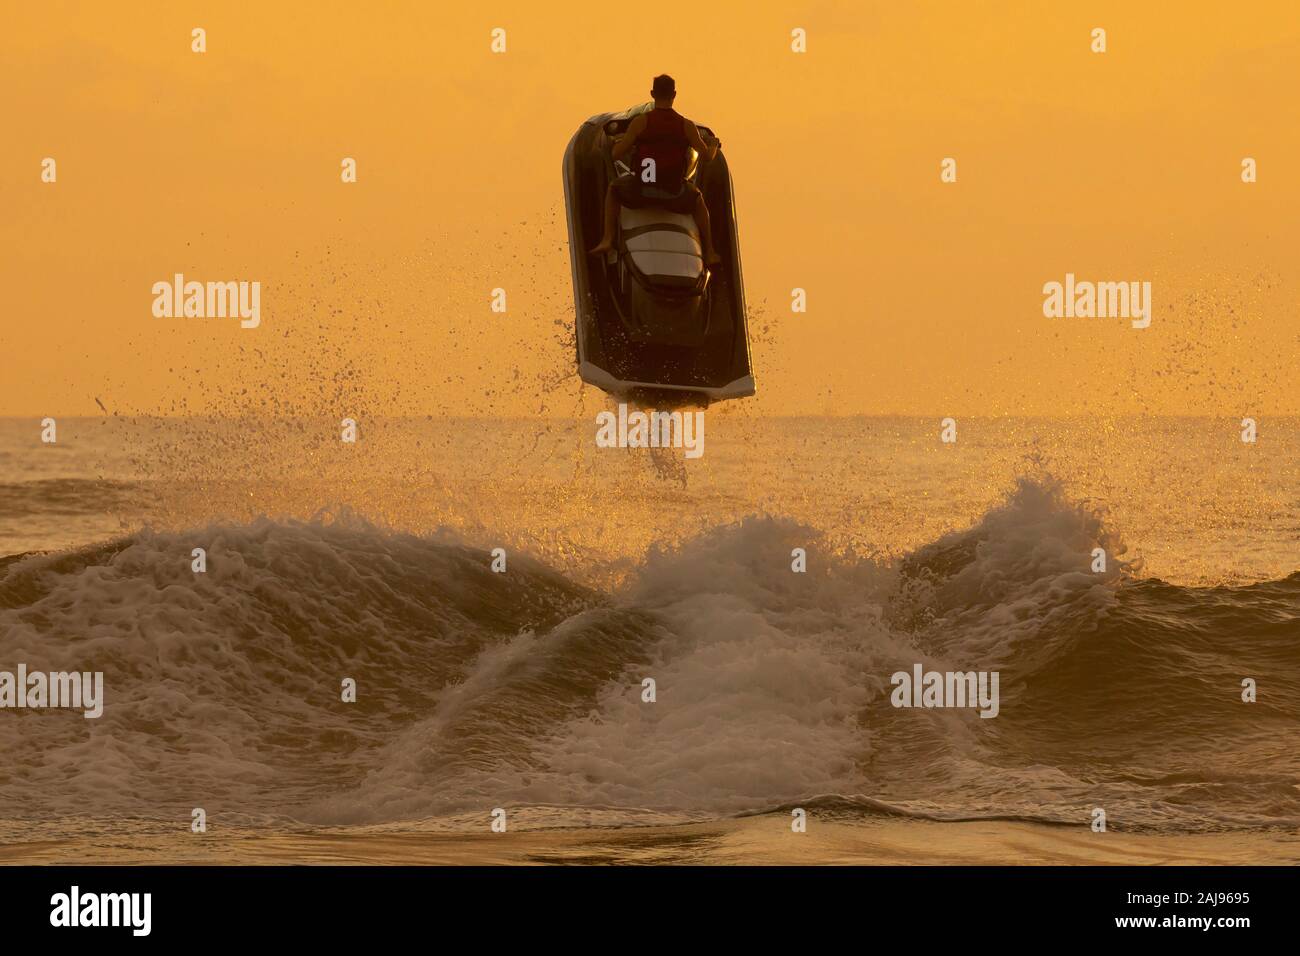 Silhouette of man riding a water motor bike and jumping over a wave on sunrise Stock Photo